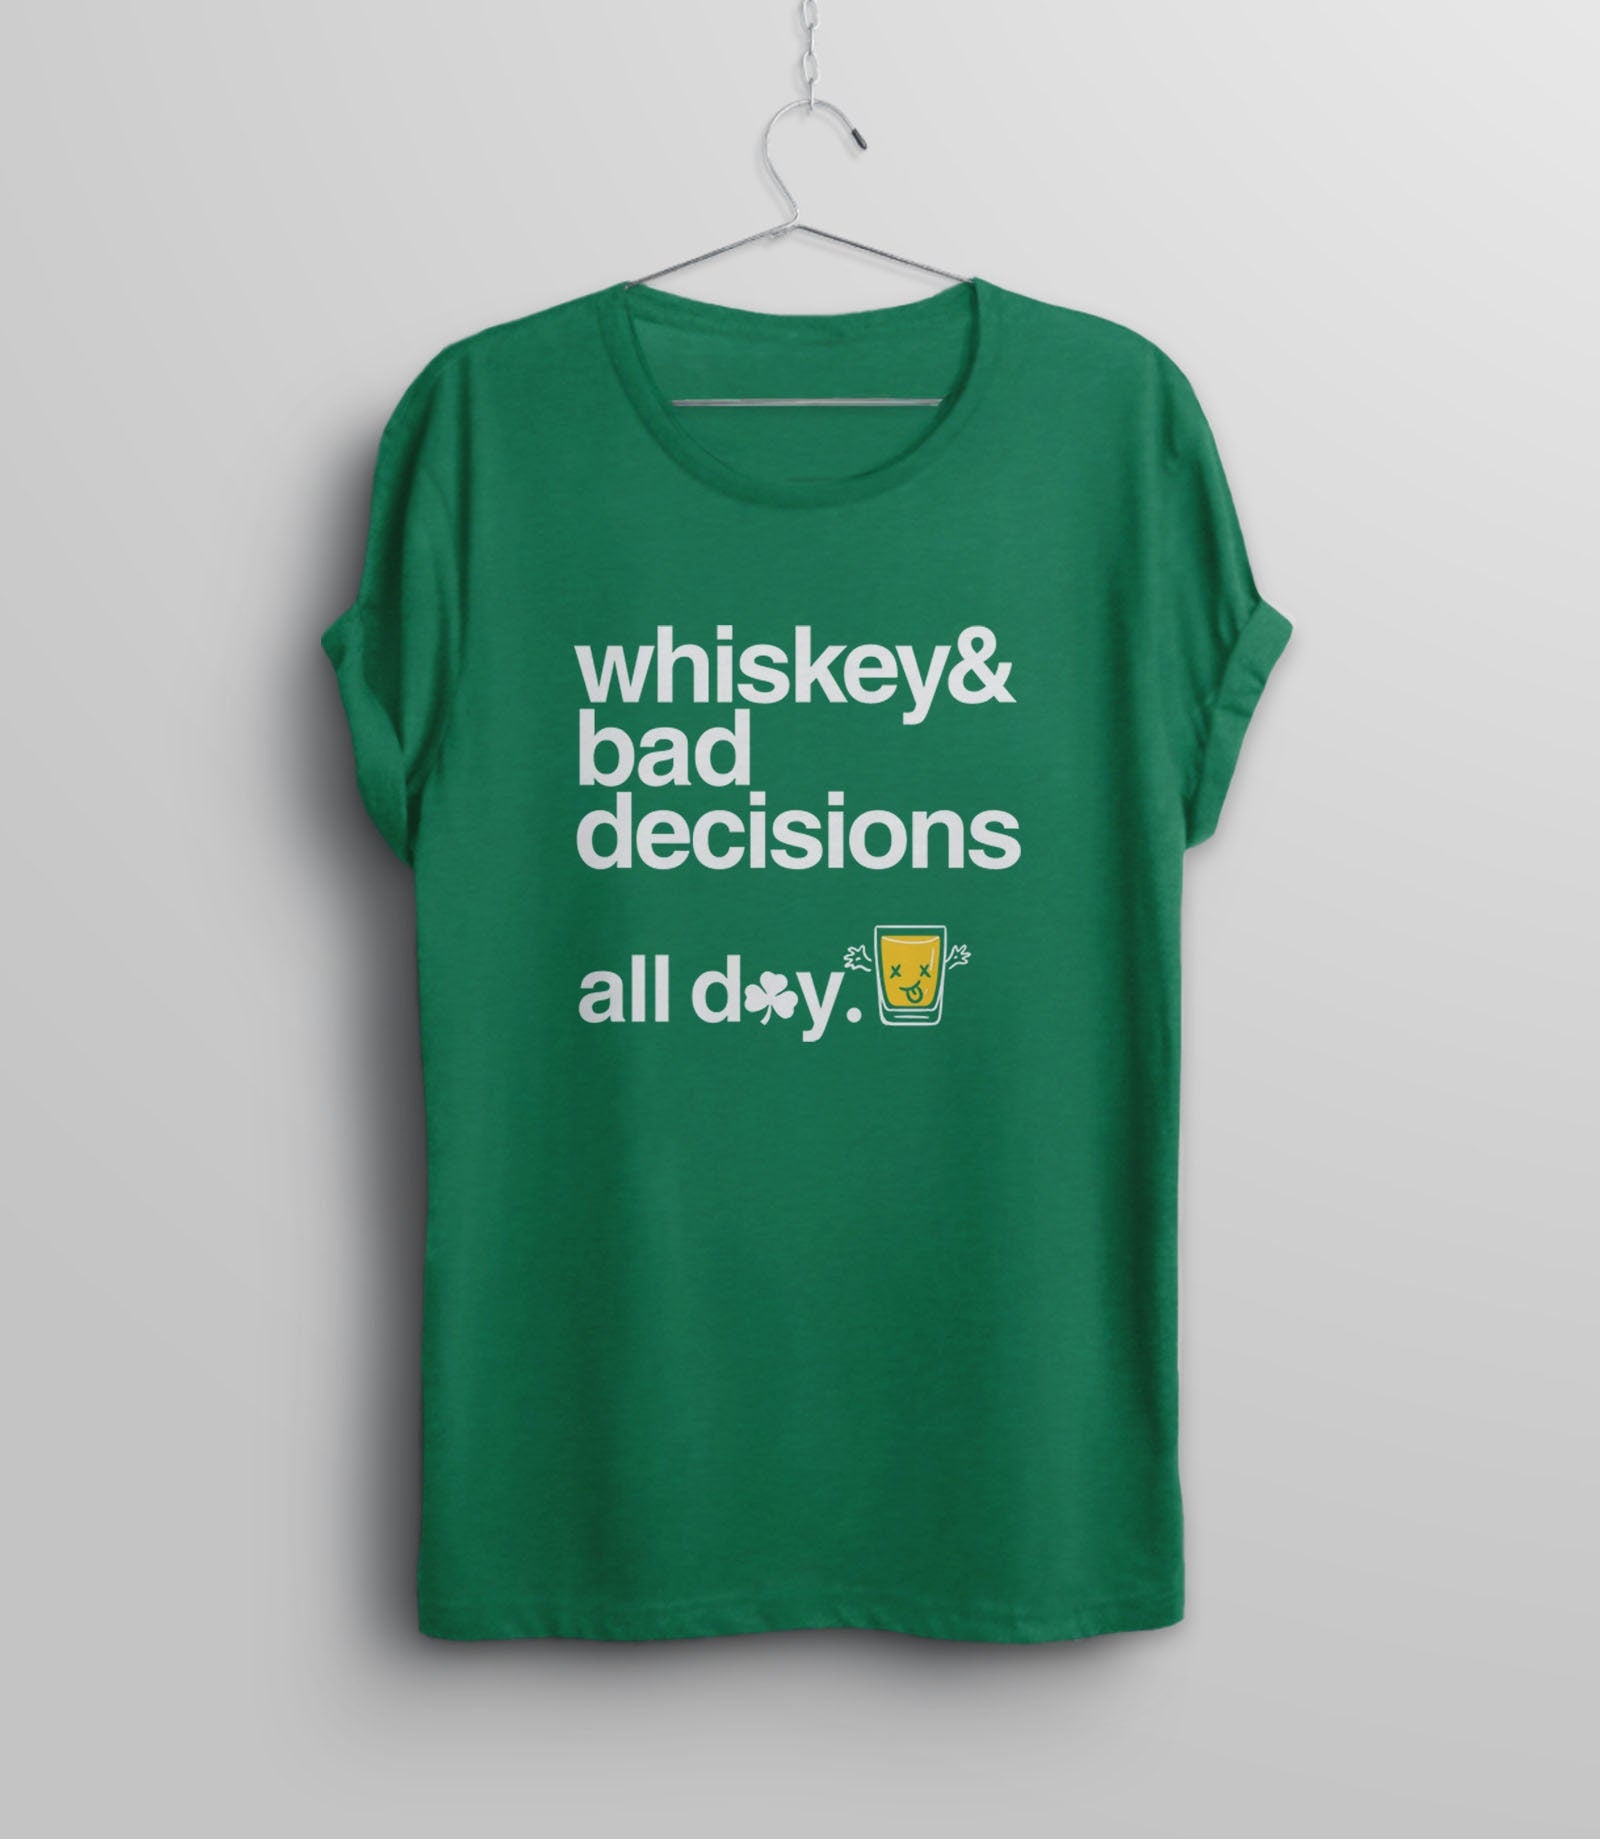 Irish Drinking Shirt | Funny St Pattys Day Tee, Kelly Green Unisex XS by BootsTees